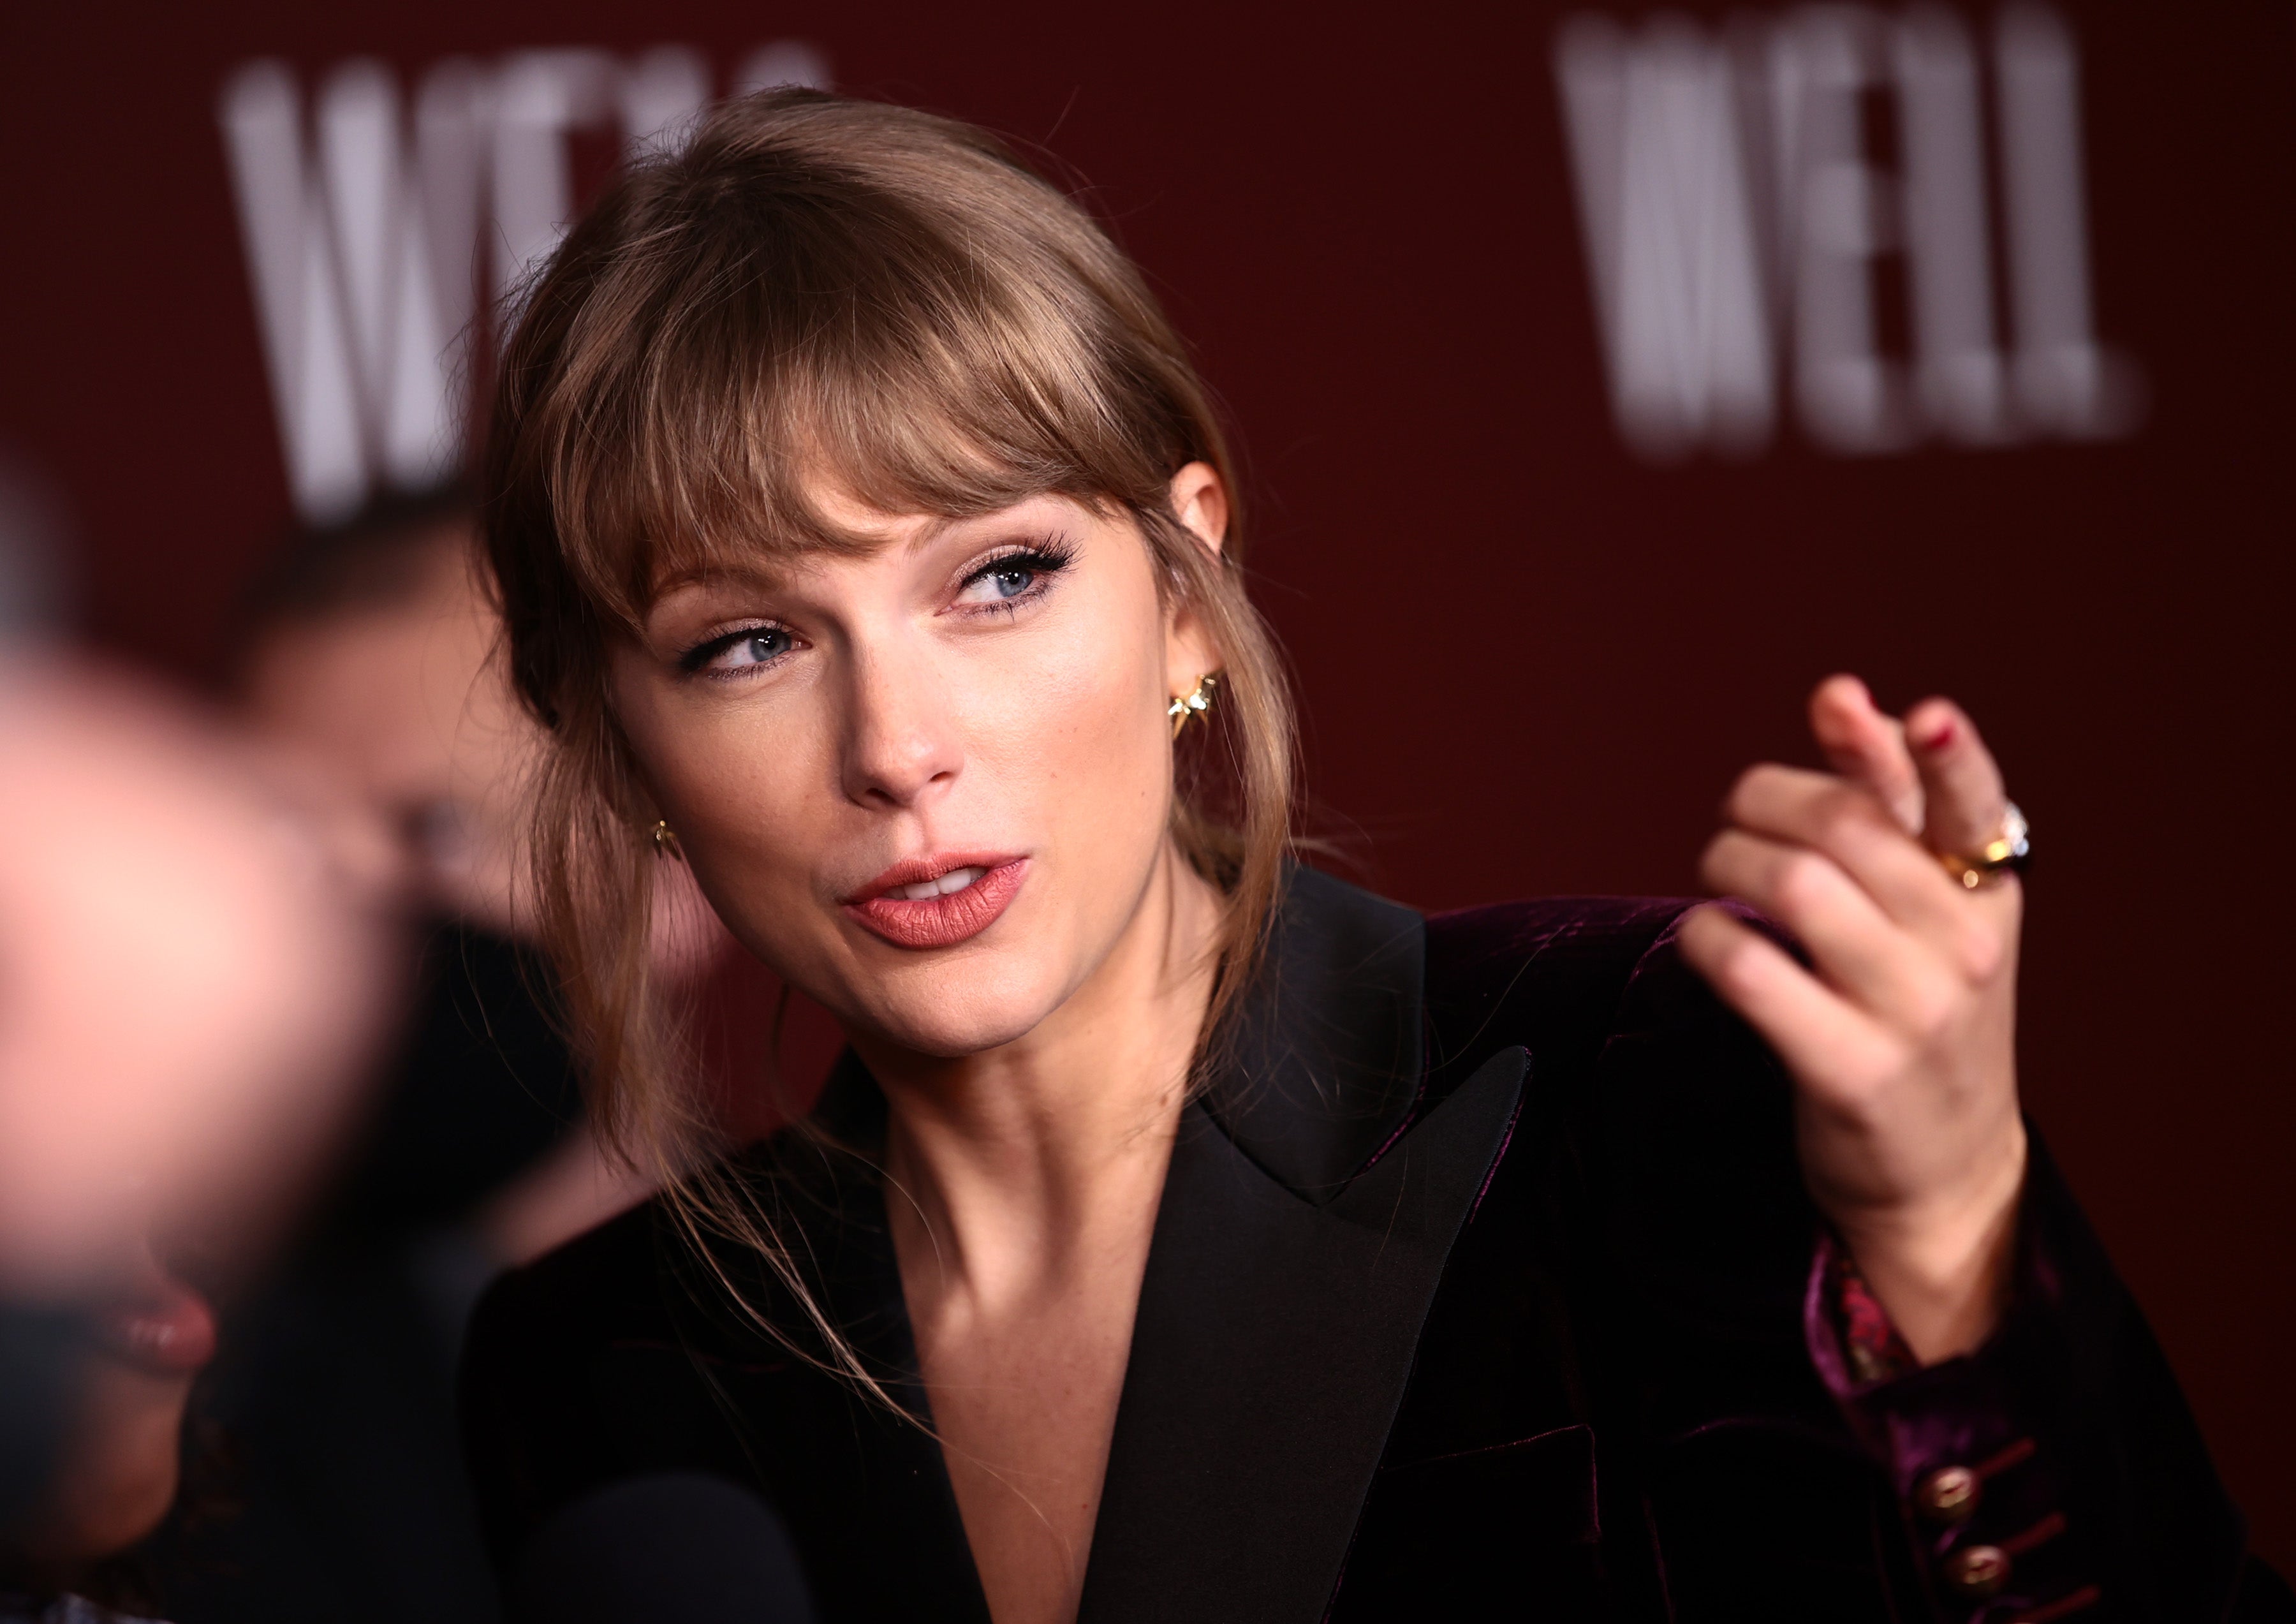 Taylor Swift fan arrested for 'crashing' car into her NYC home, report says | The Independent